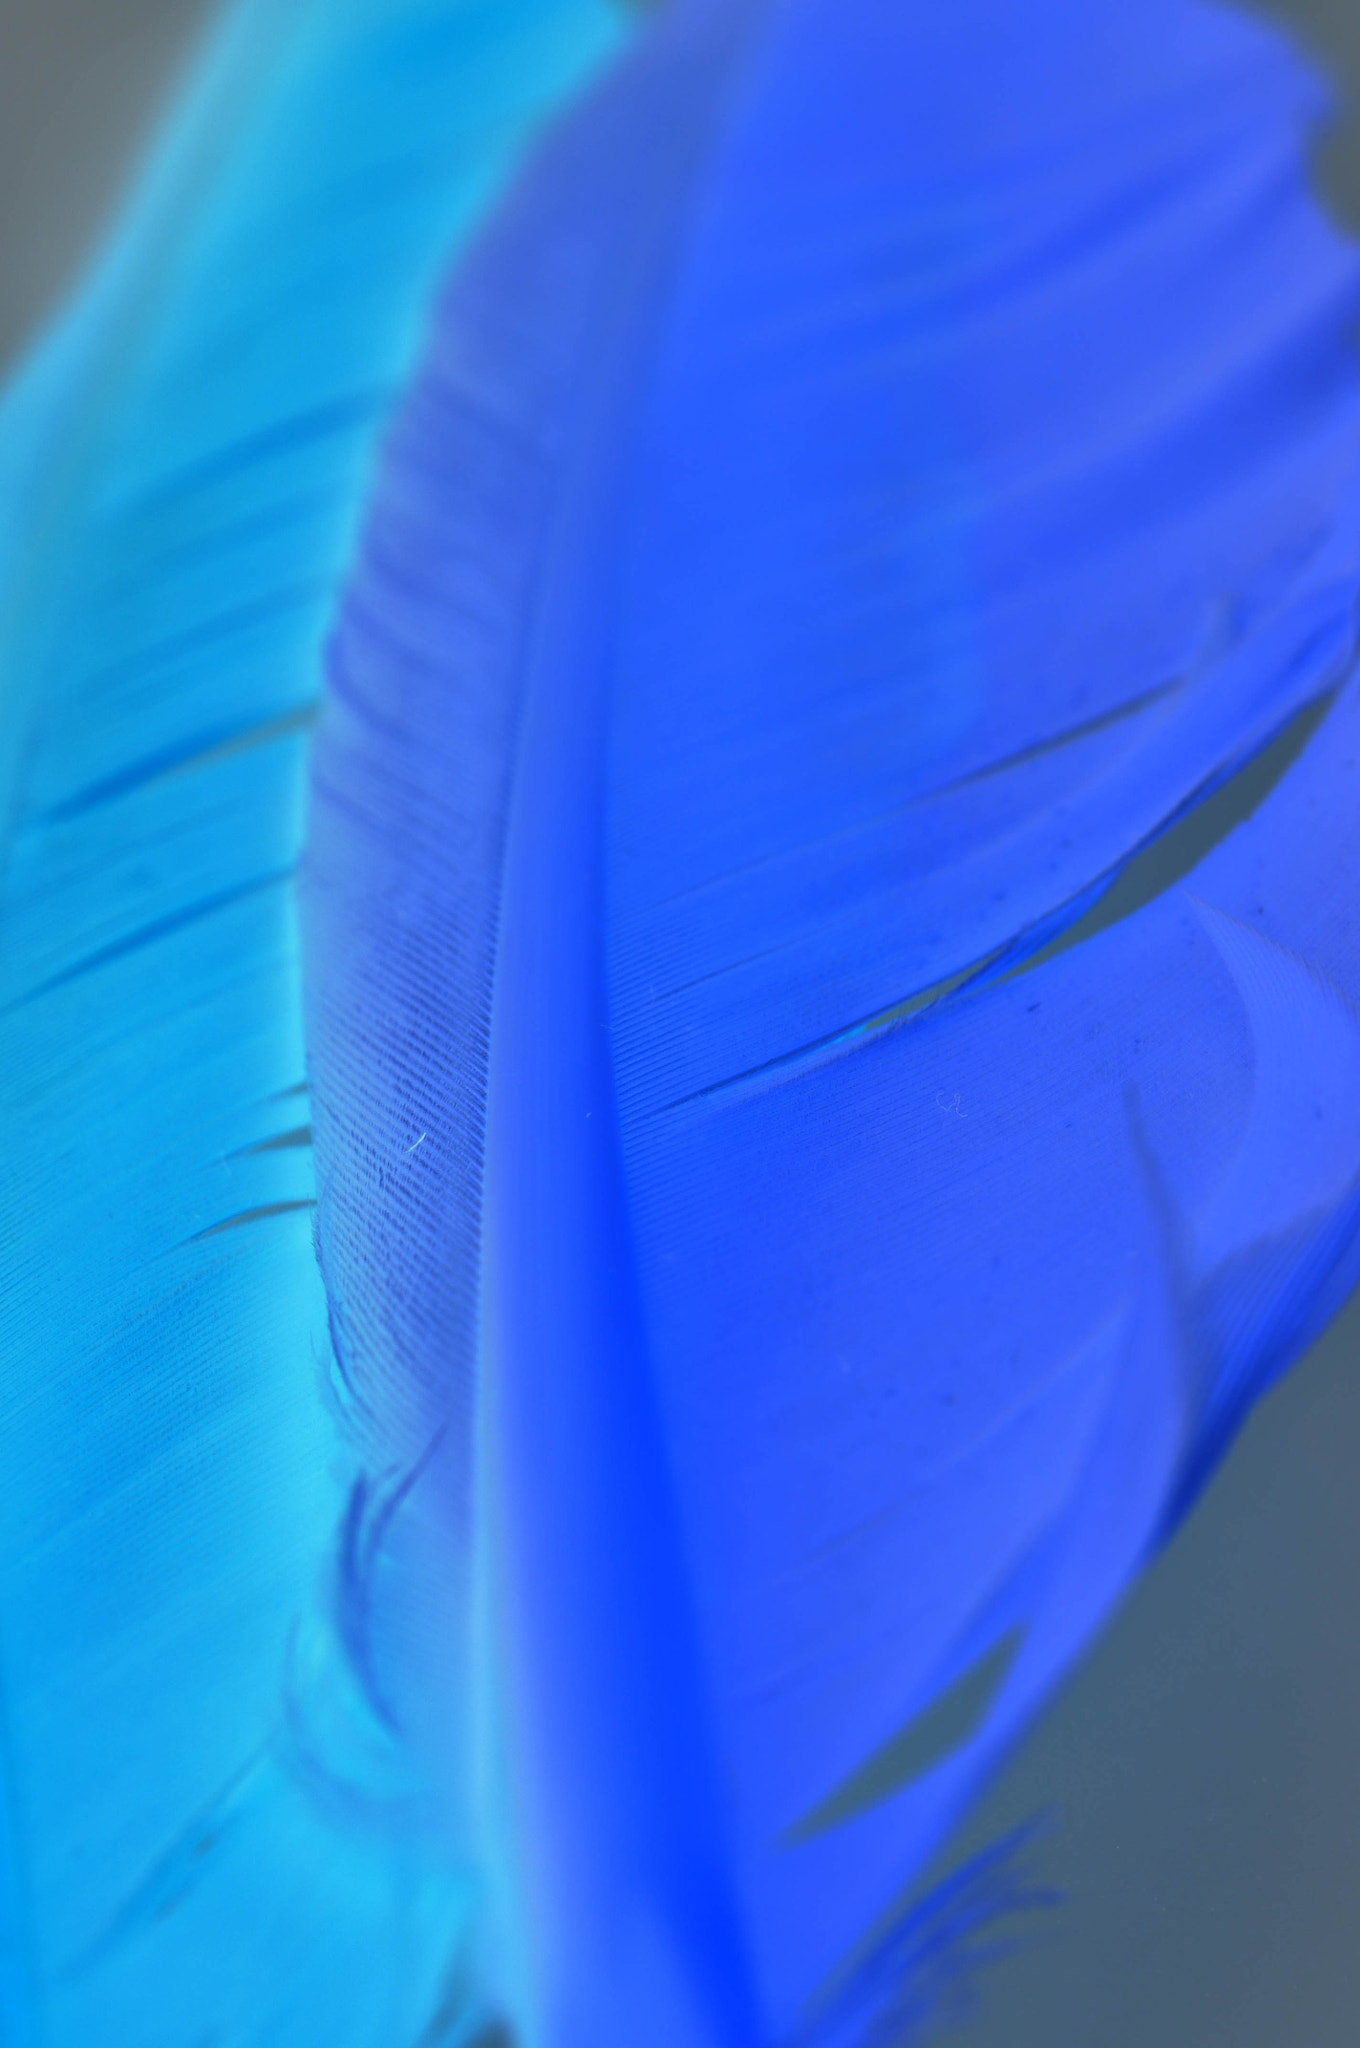 Nikon D90 + Nikon AF Micro-Nikkor 60mm F2.8D sample photo. Inverted feathers photography